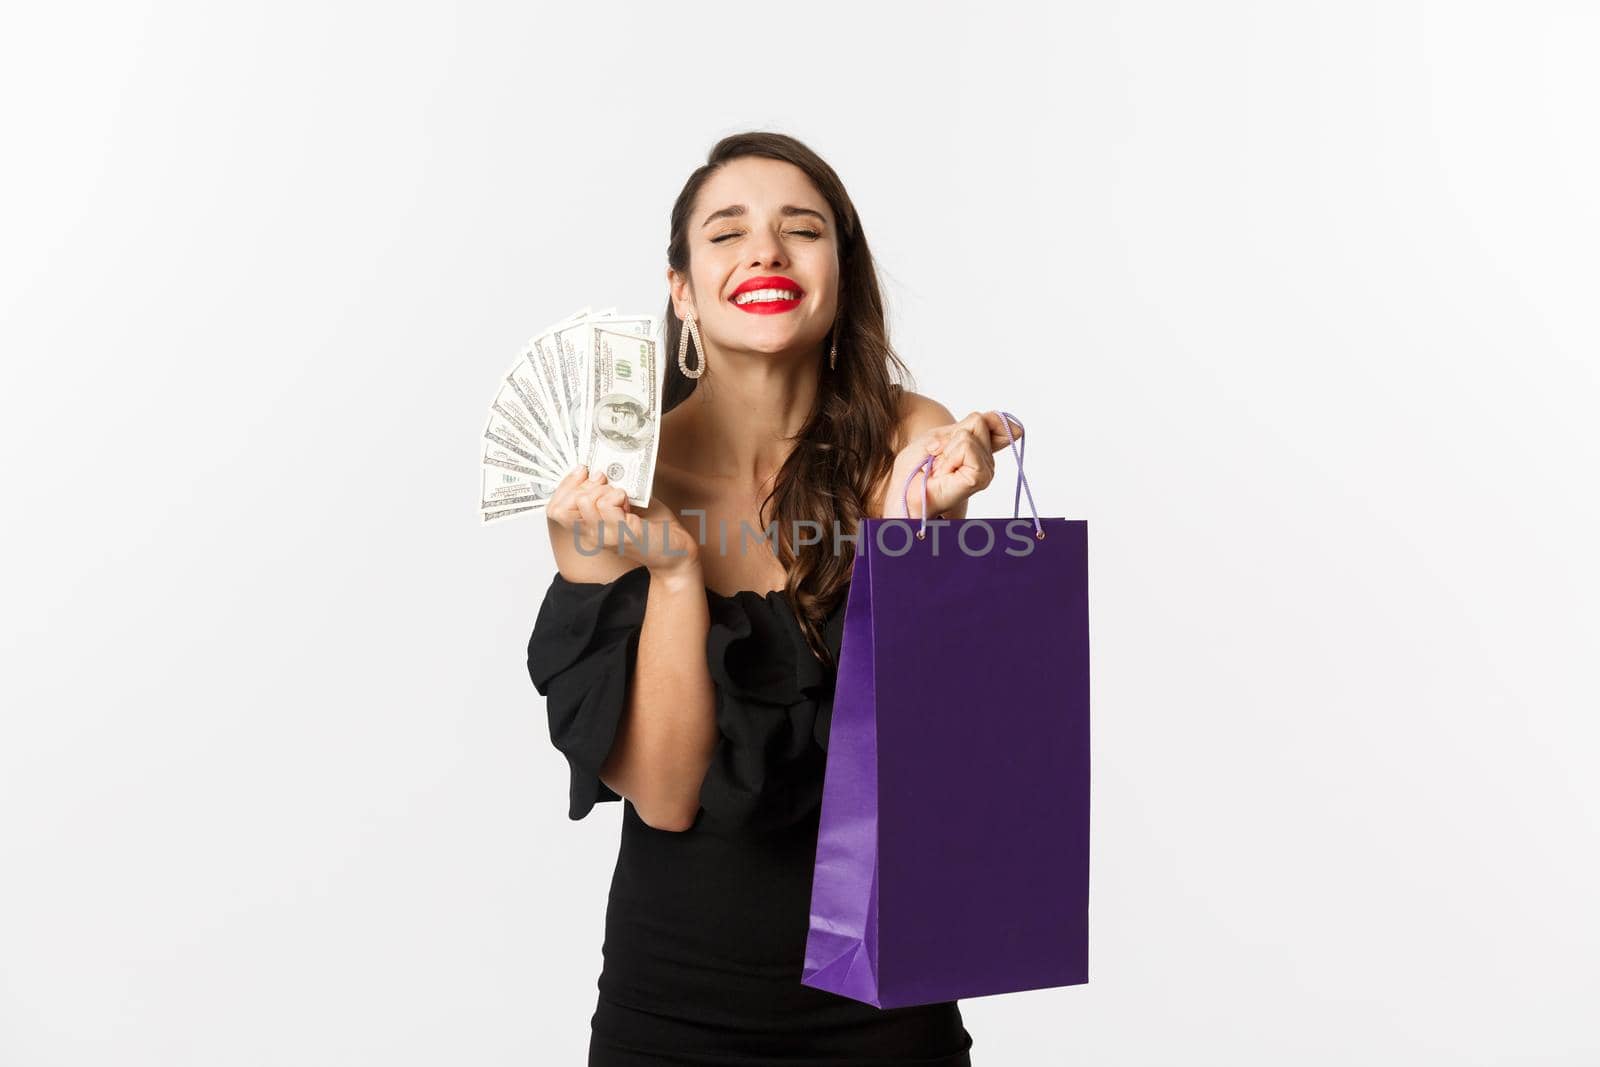 Satisfied and happy woman enjoying shopping, holding bag and money, smiling pleased, standing over white background.